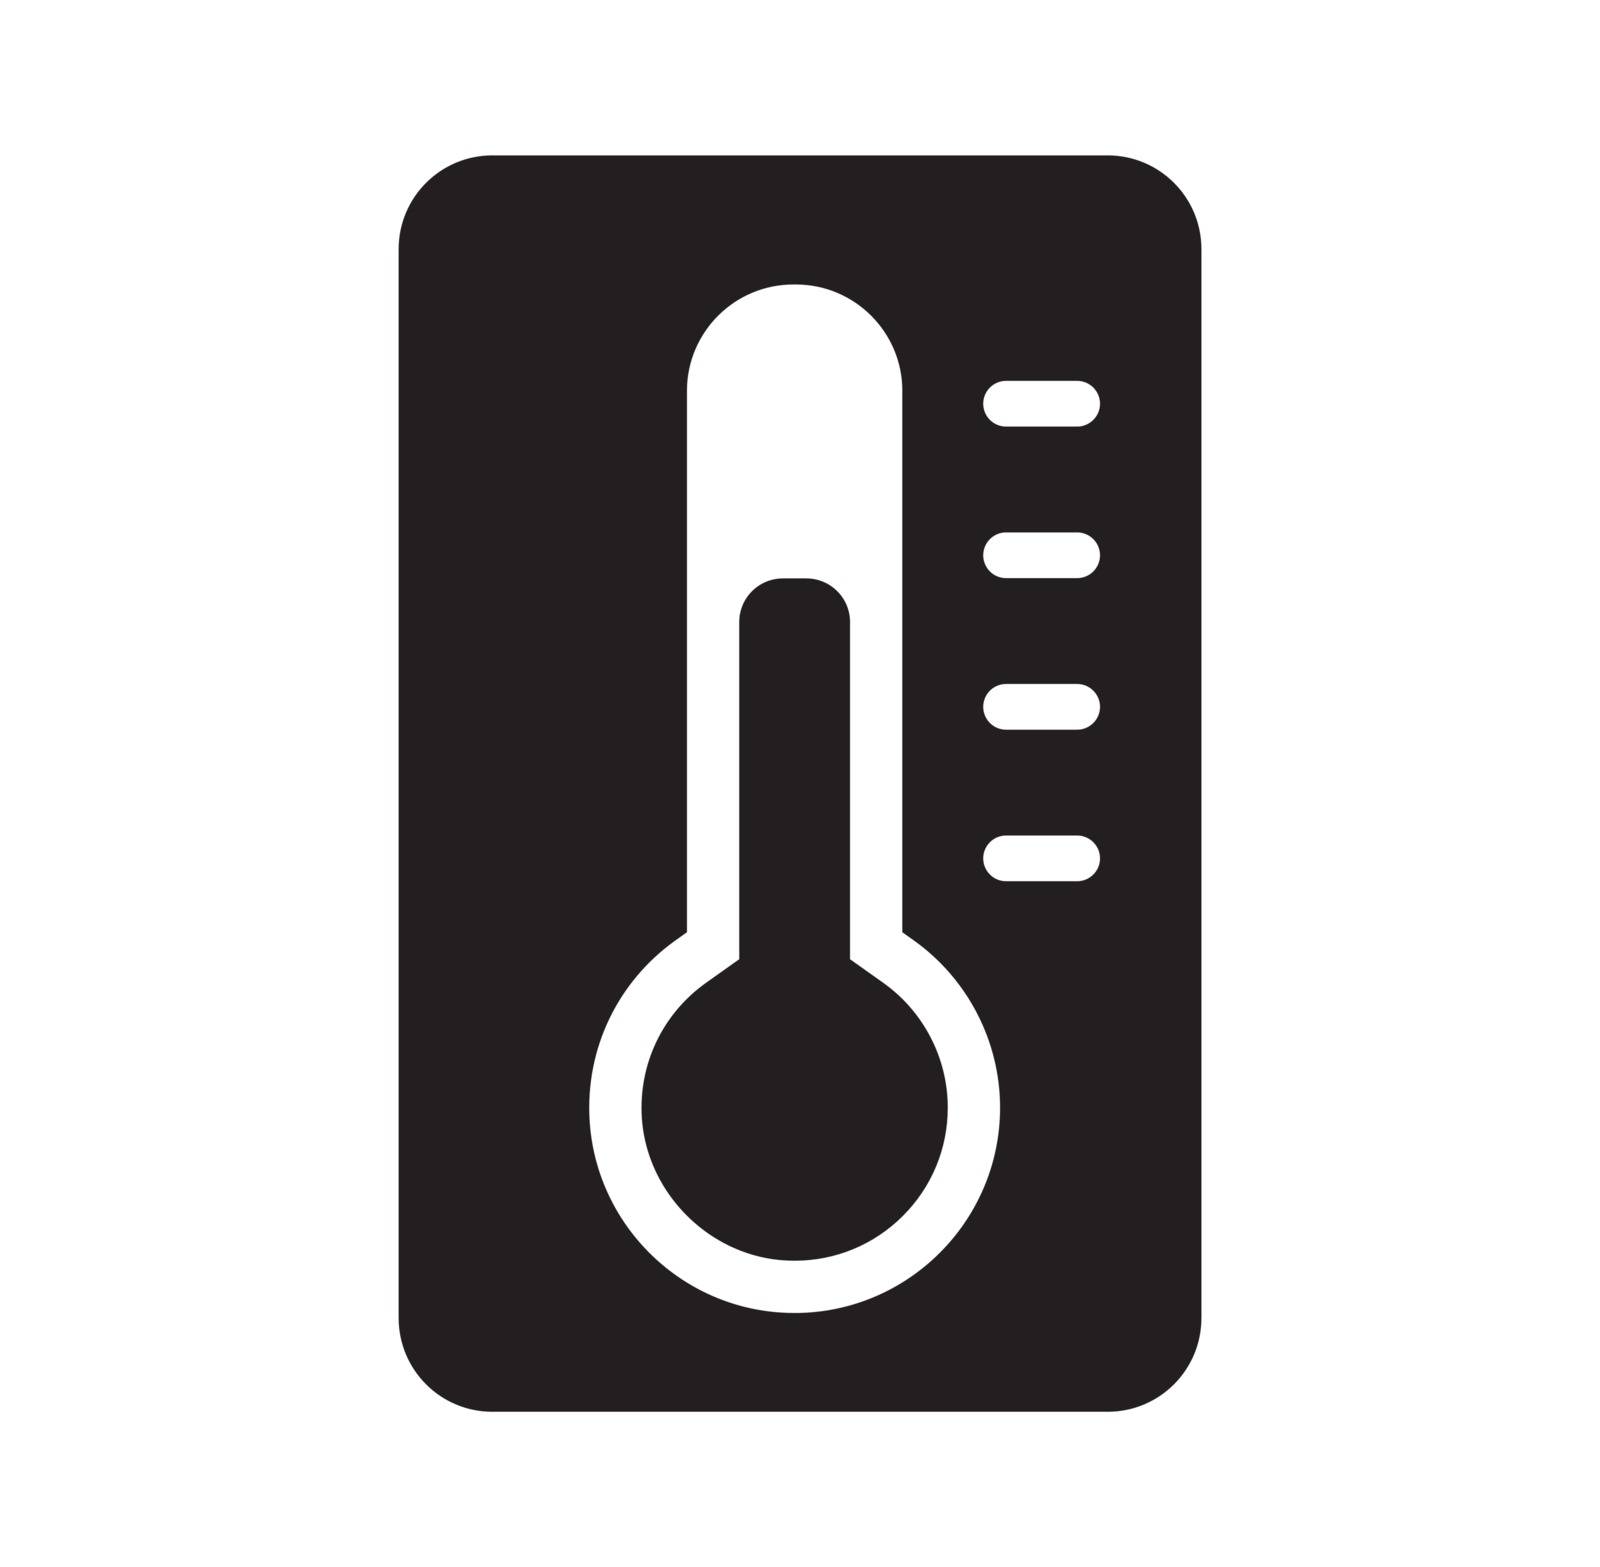 Thermometer / barometer icon